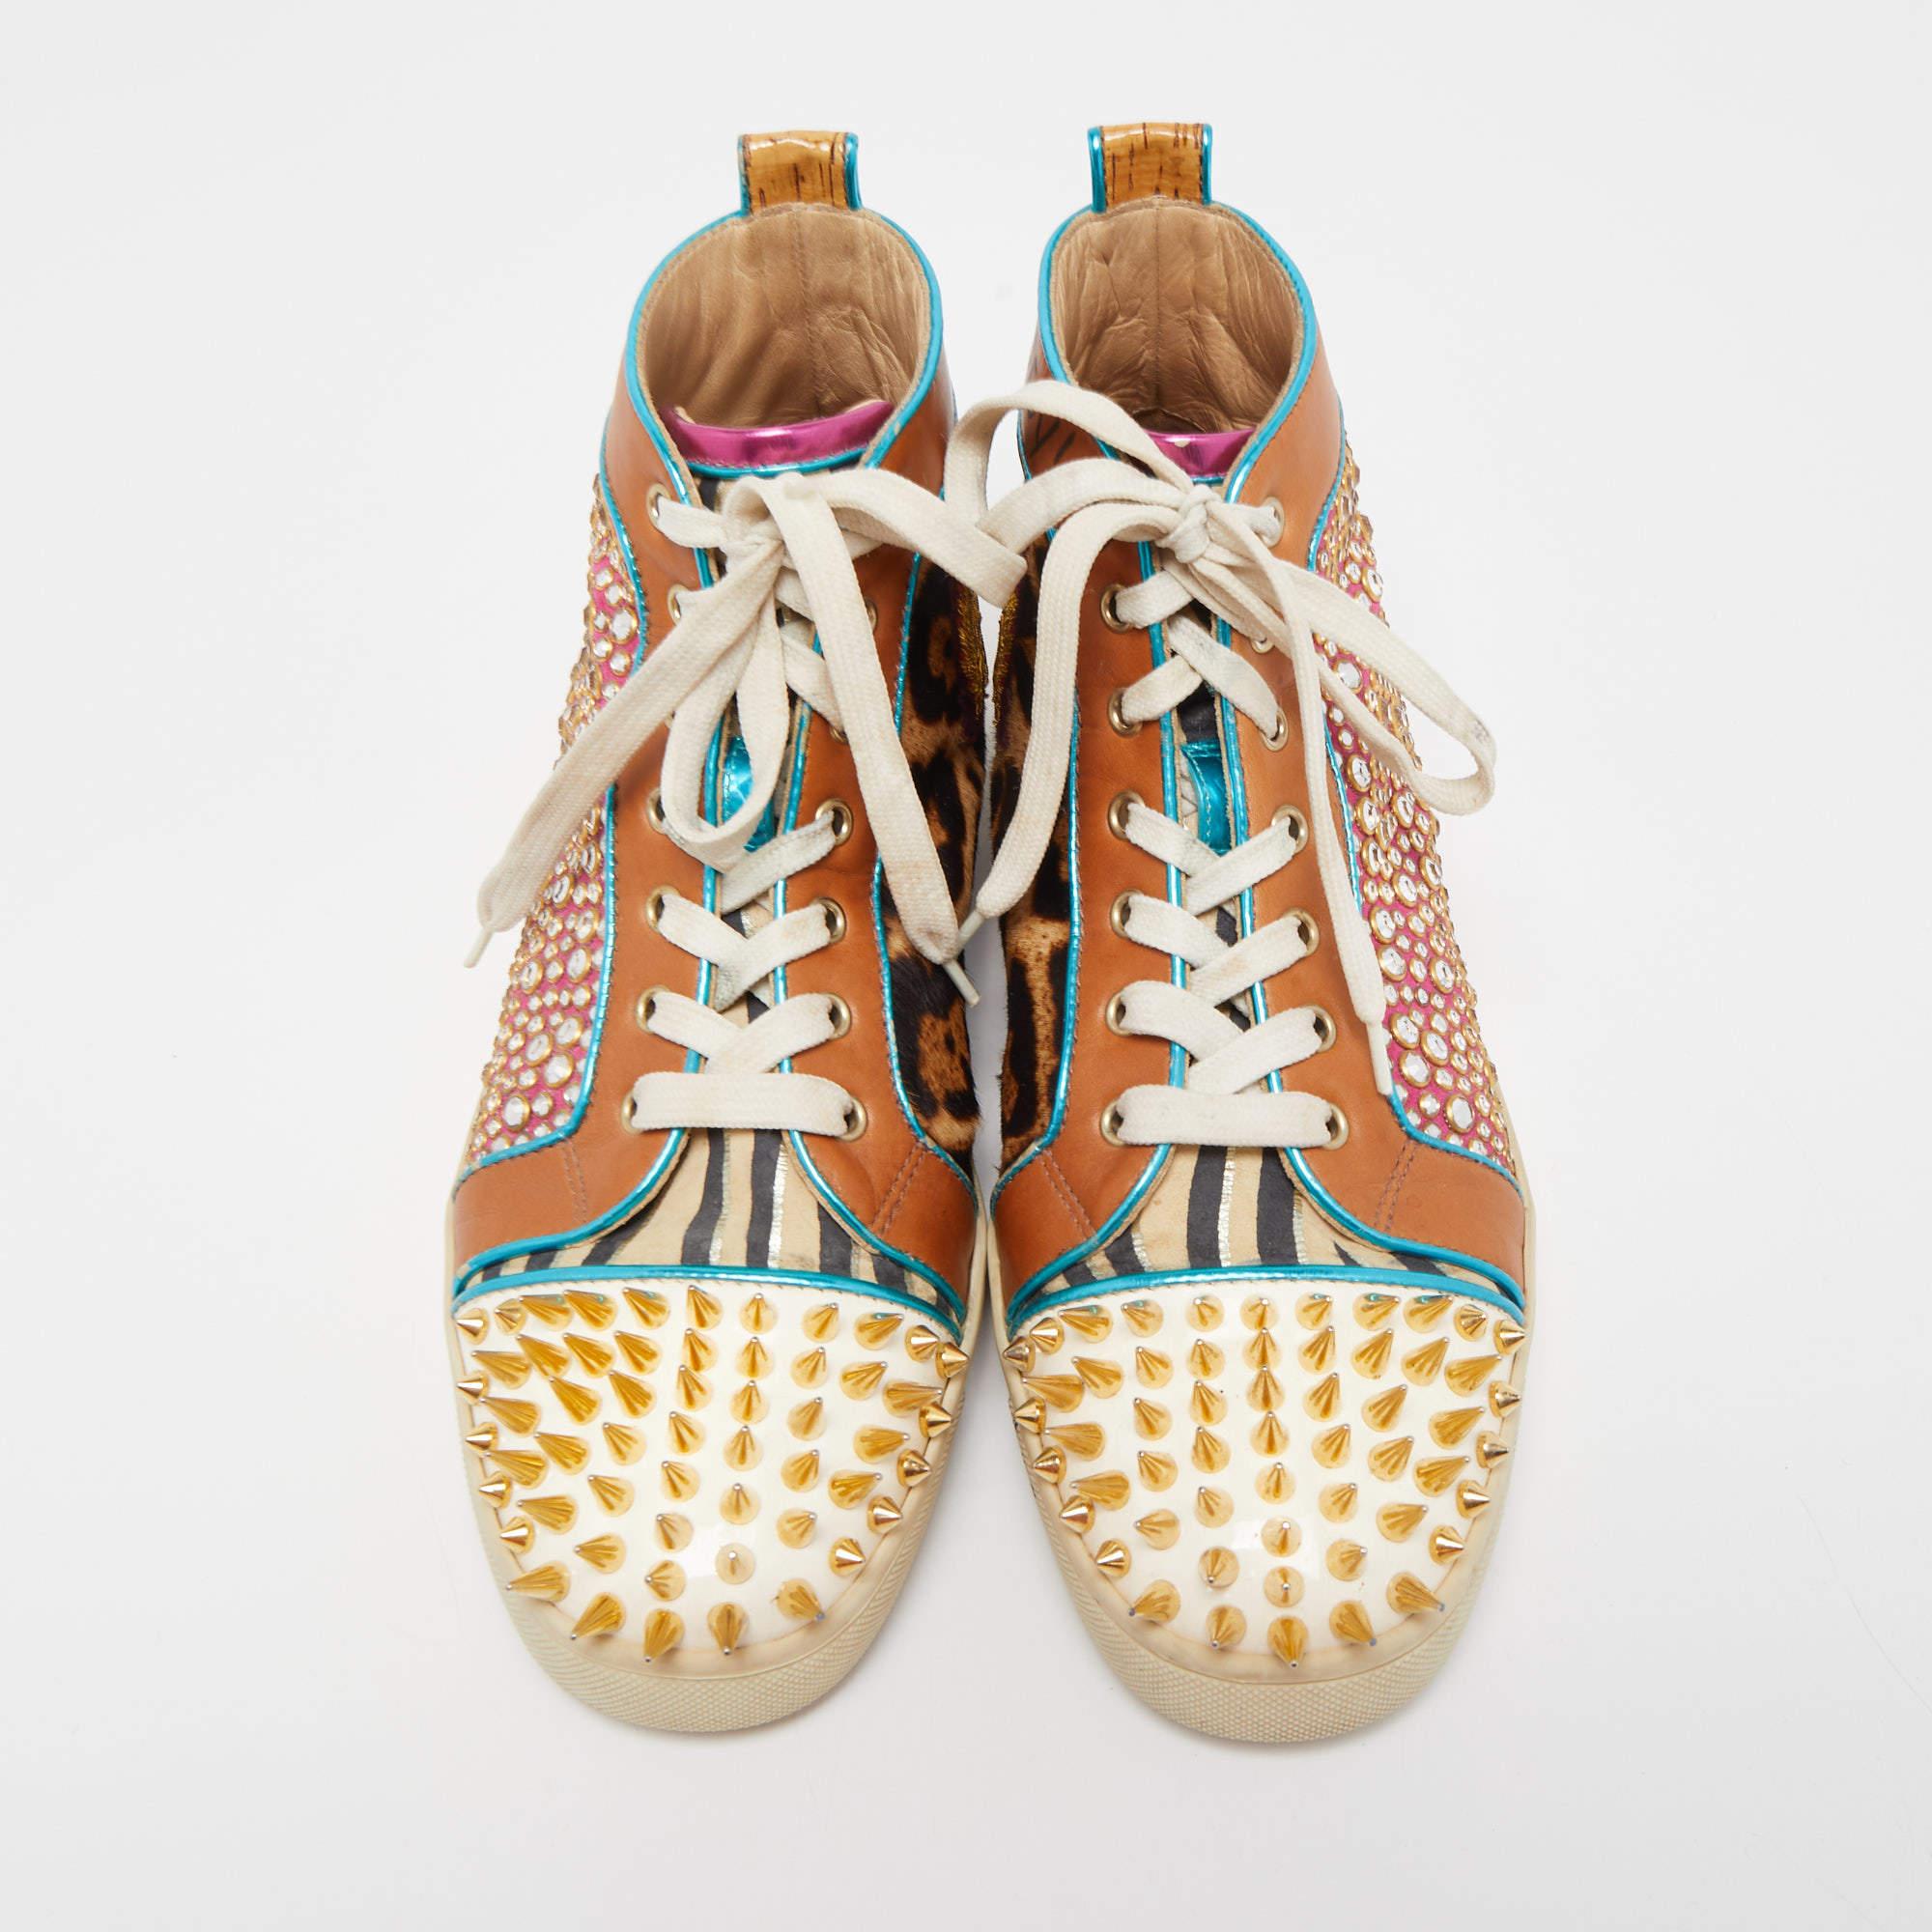 Nail your casual looks every time you step out in these sneakers from Christian Louboutin. They are covered in leopard-printed calfhair, suede as well as leather and styled with spikes and crystals. The sneakers are laced at the front and finished